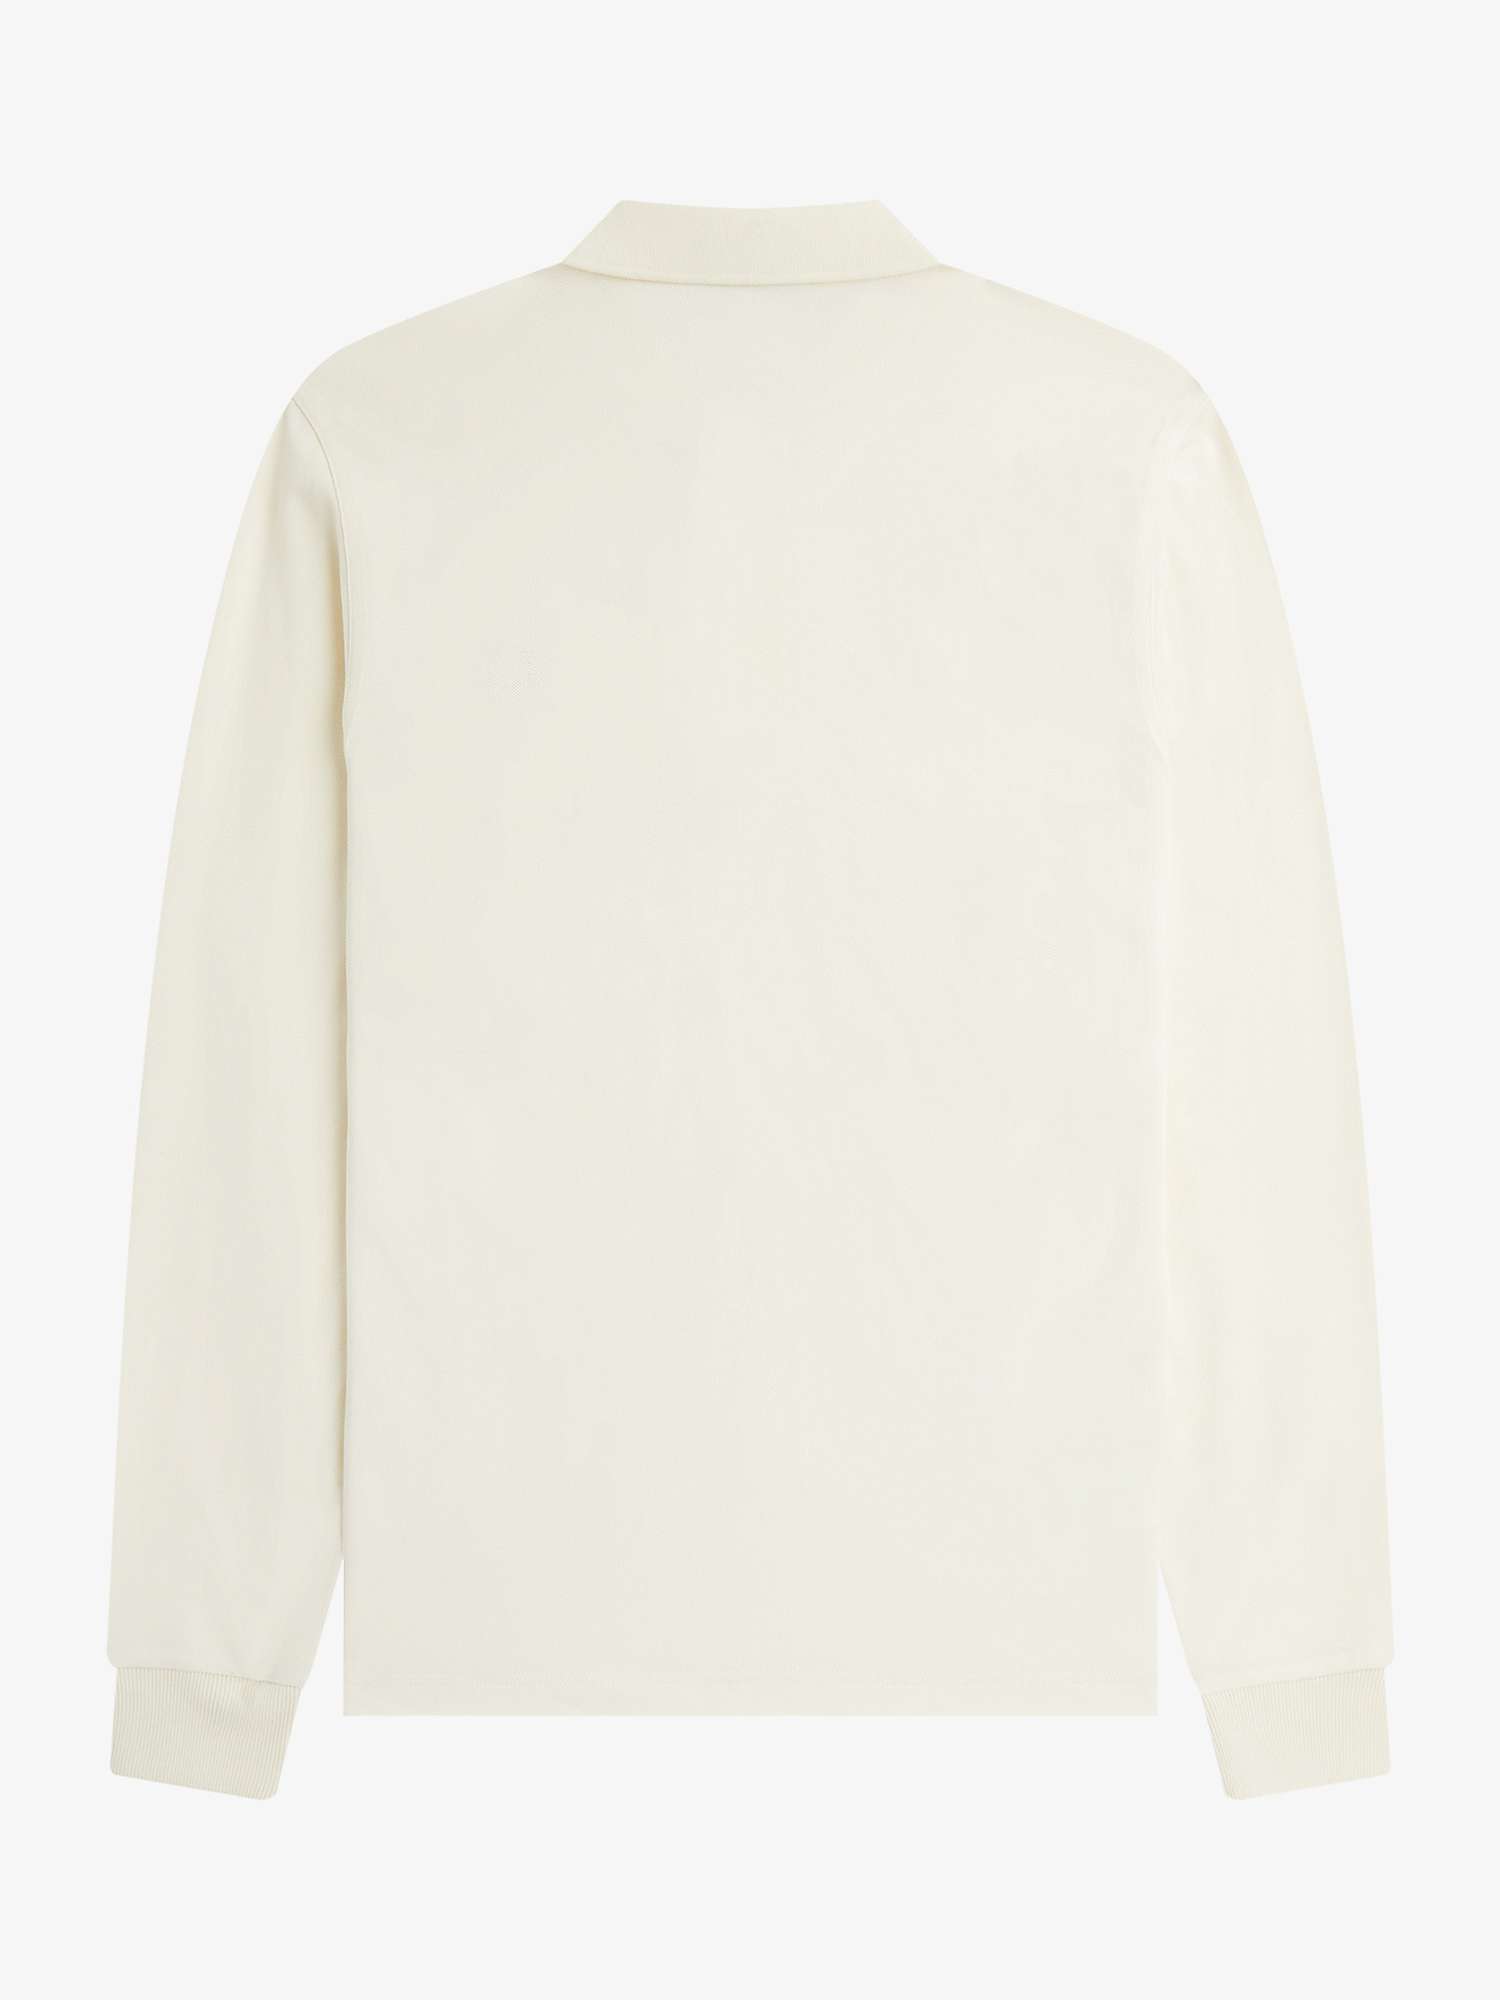 Buy Fred Perry Long Sleeve Tennis Polo Shirt, Ecru Online at johnlewis.com